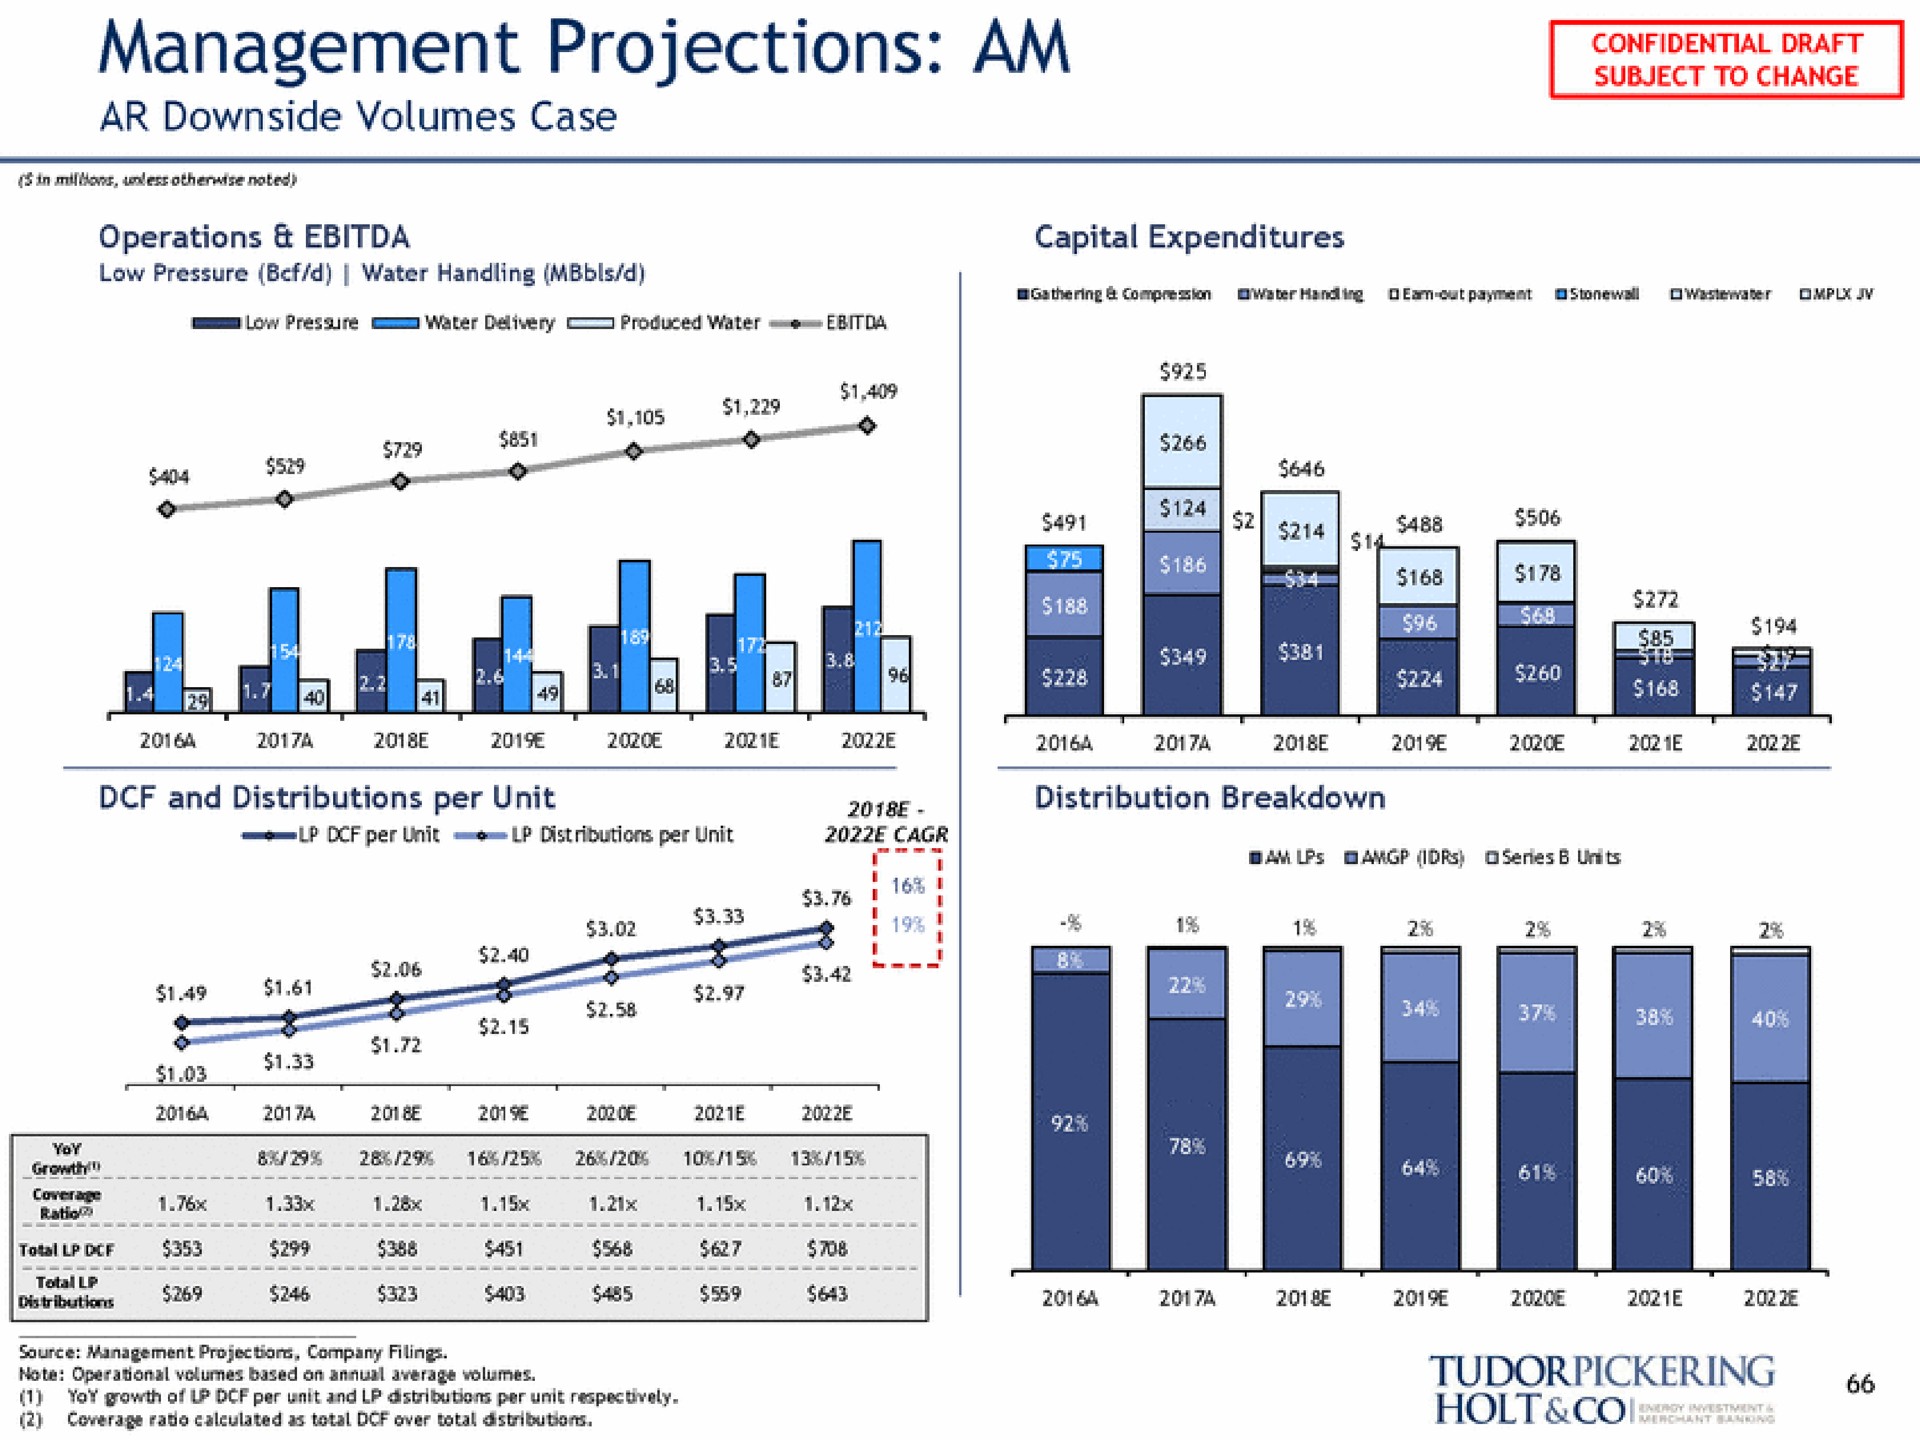 management projections am based an serial avers | Tudor, Pickering, Holt & Co